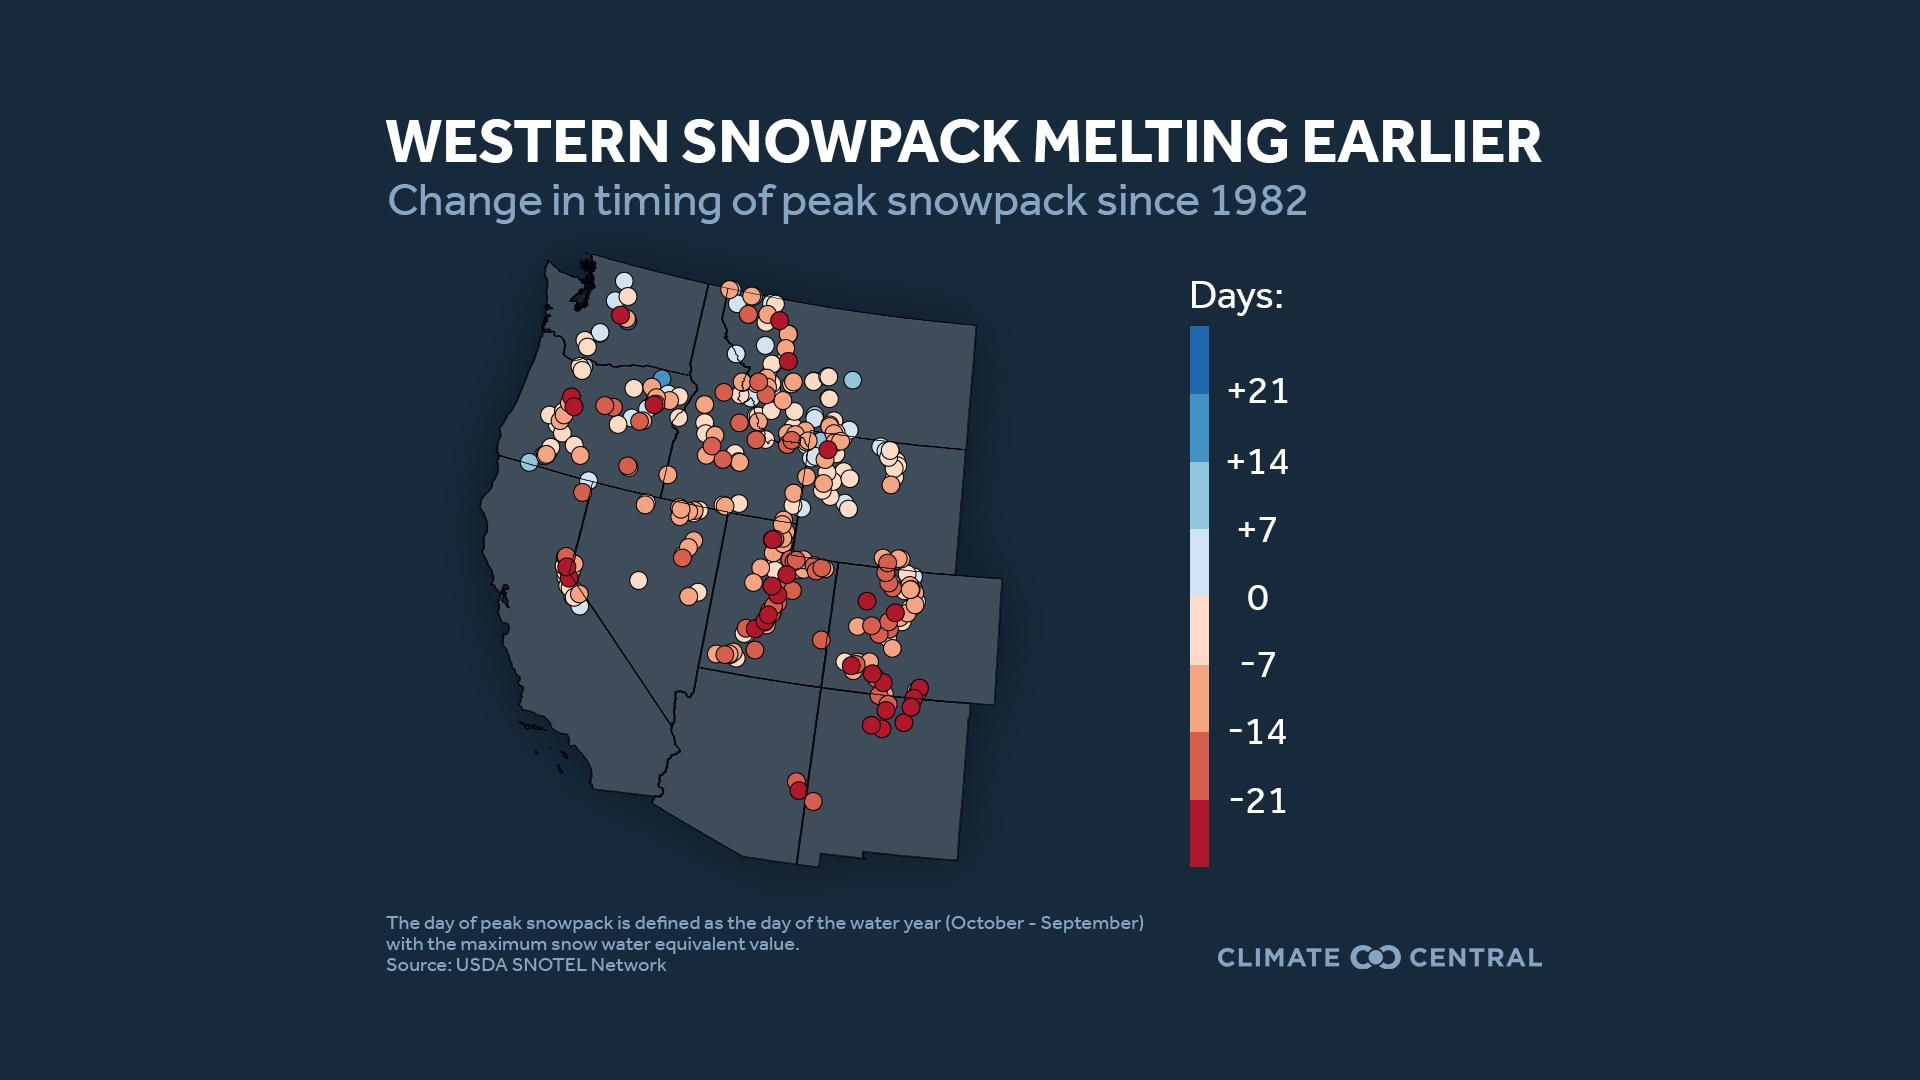 Snowpack melting earlier - Water in the West